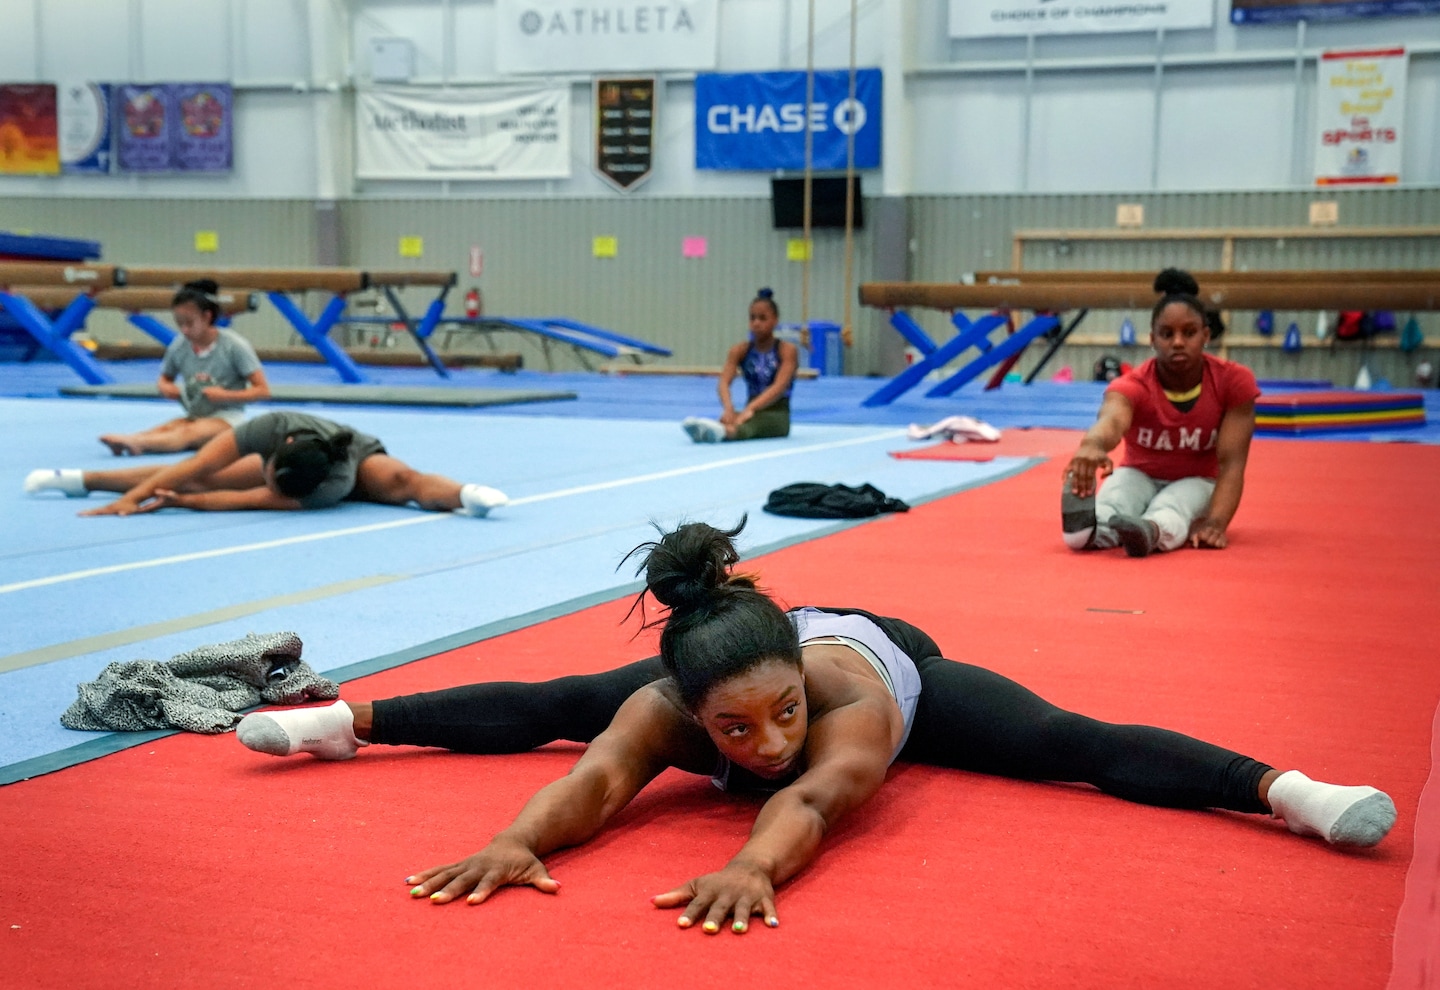 Trying to make it to the Olympics? Go train with Simone Biles.